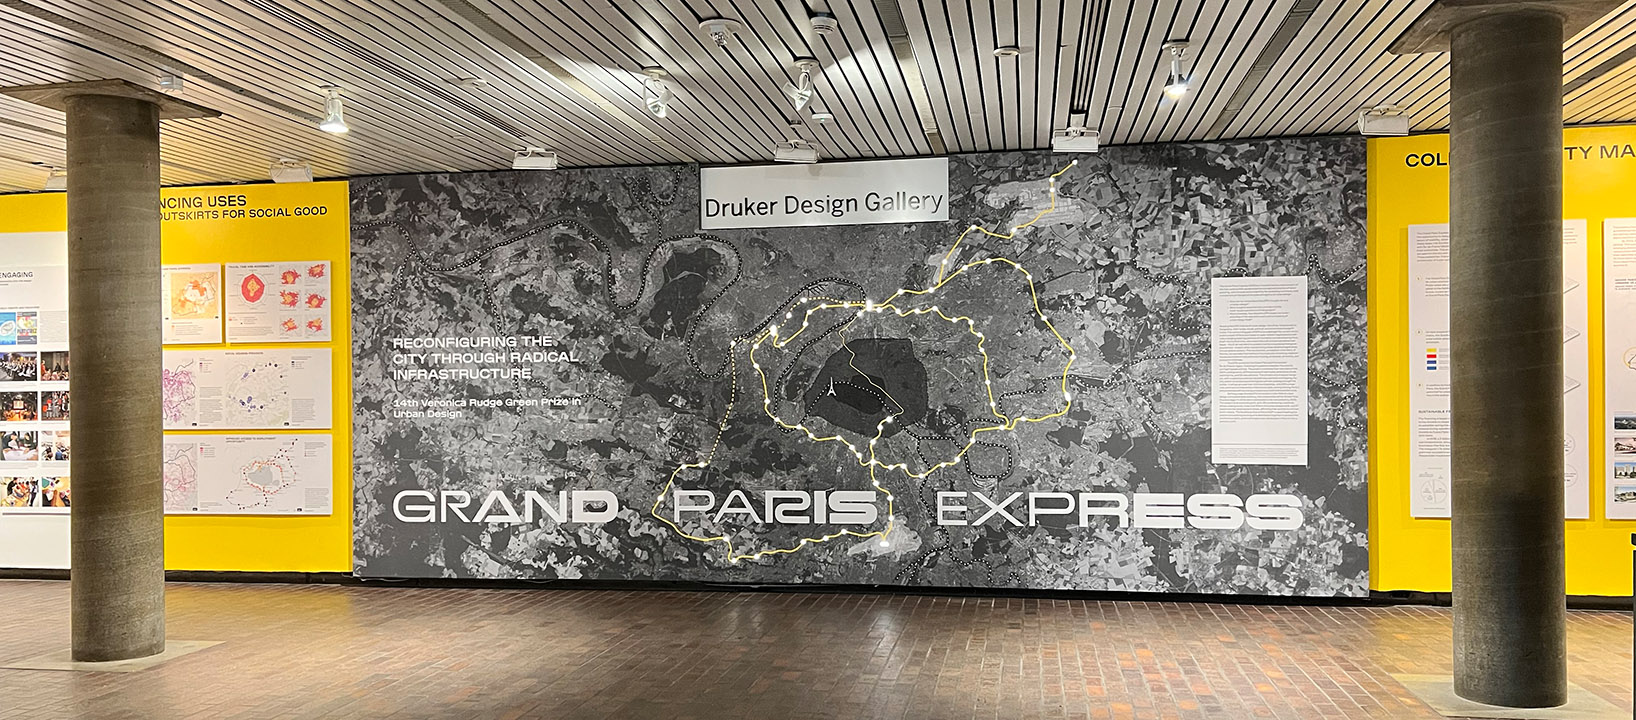 Exhibition wall showing a large map of paris, and the 68 new stations indicated by lights